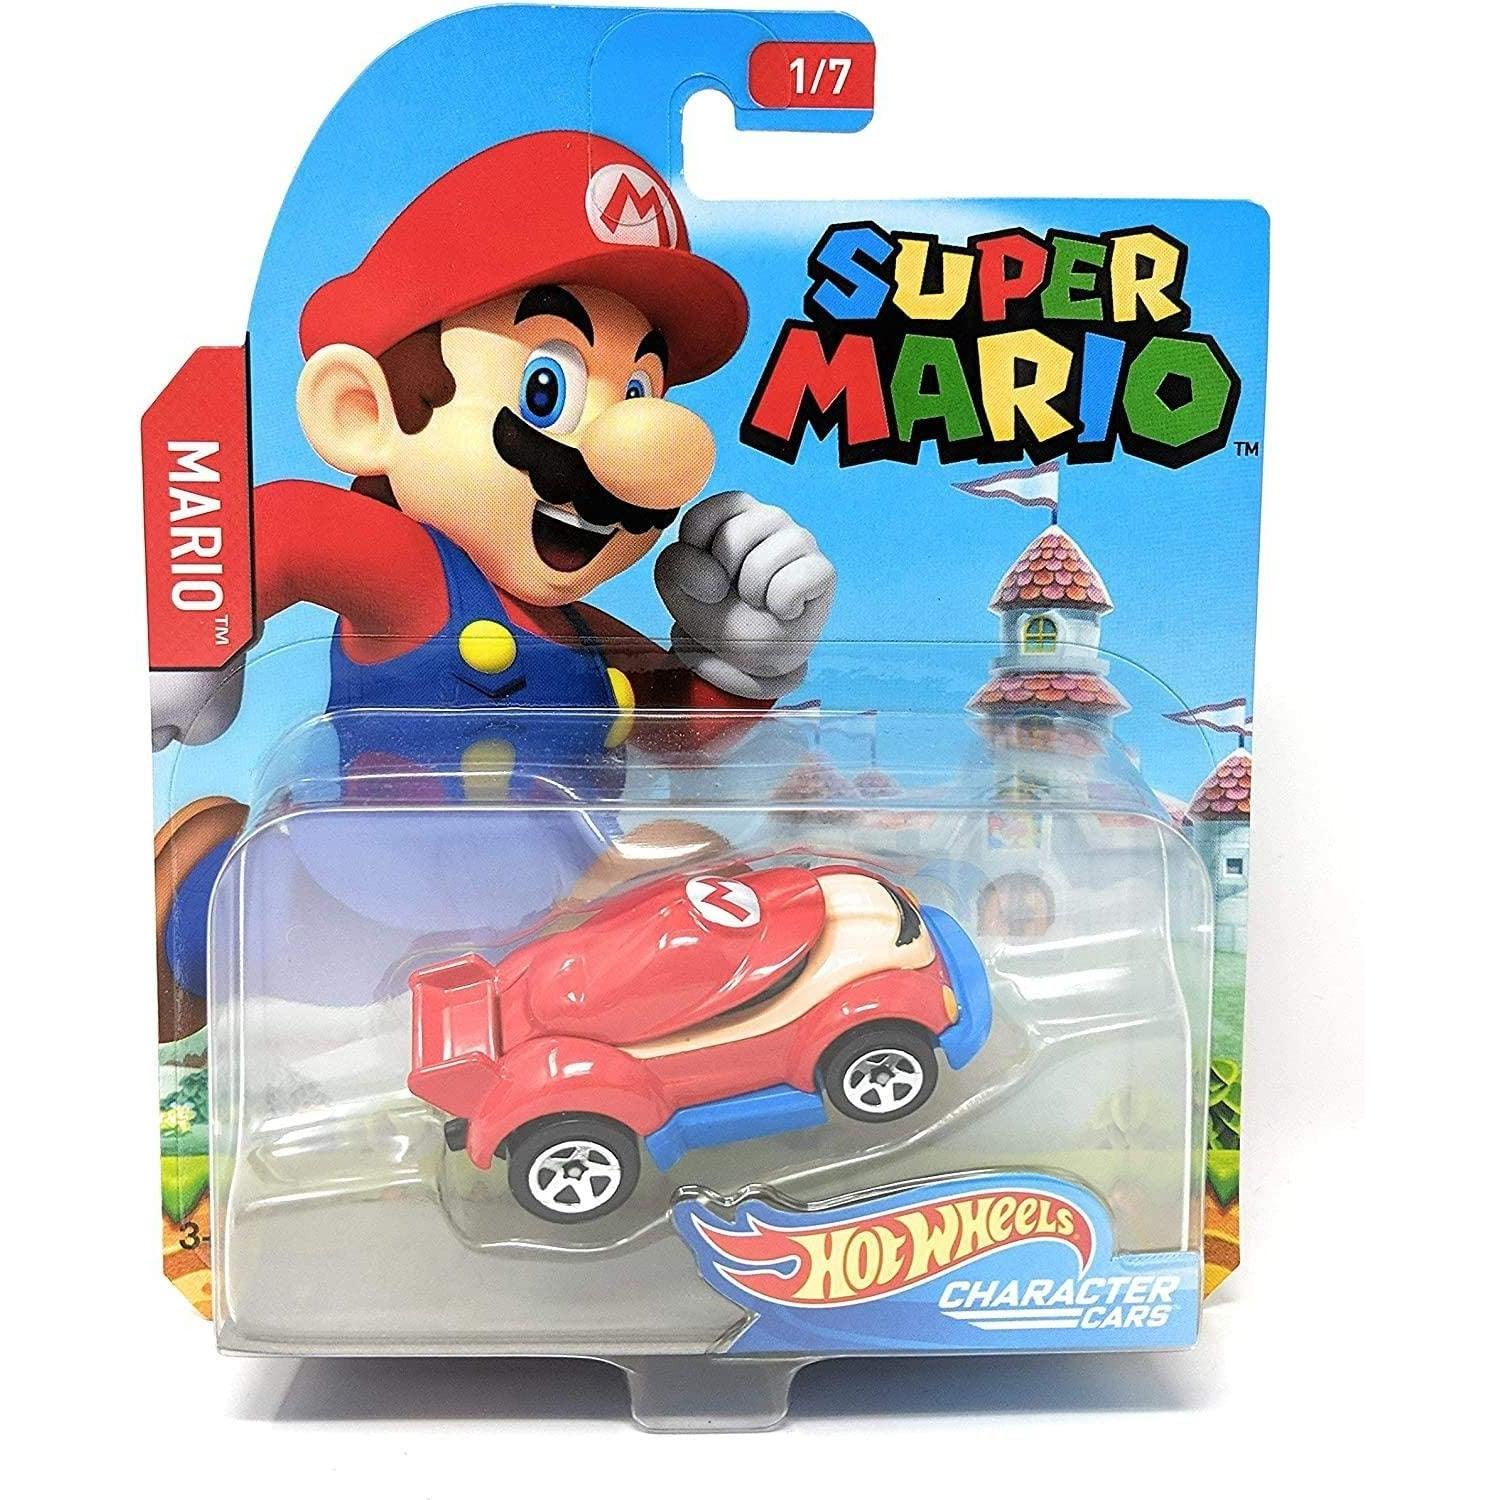 Hot Wheels Super Mario Character Cars Mario Vehicle 1/7 - BumbleToys - 4+ Years, 5-7 Years, 8-13 Years, Boys, Collectible Vehicles, Pre-Order, Super Mario